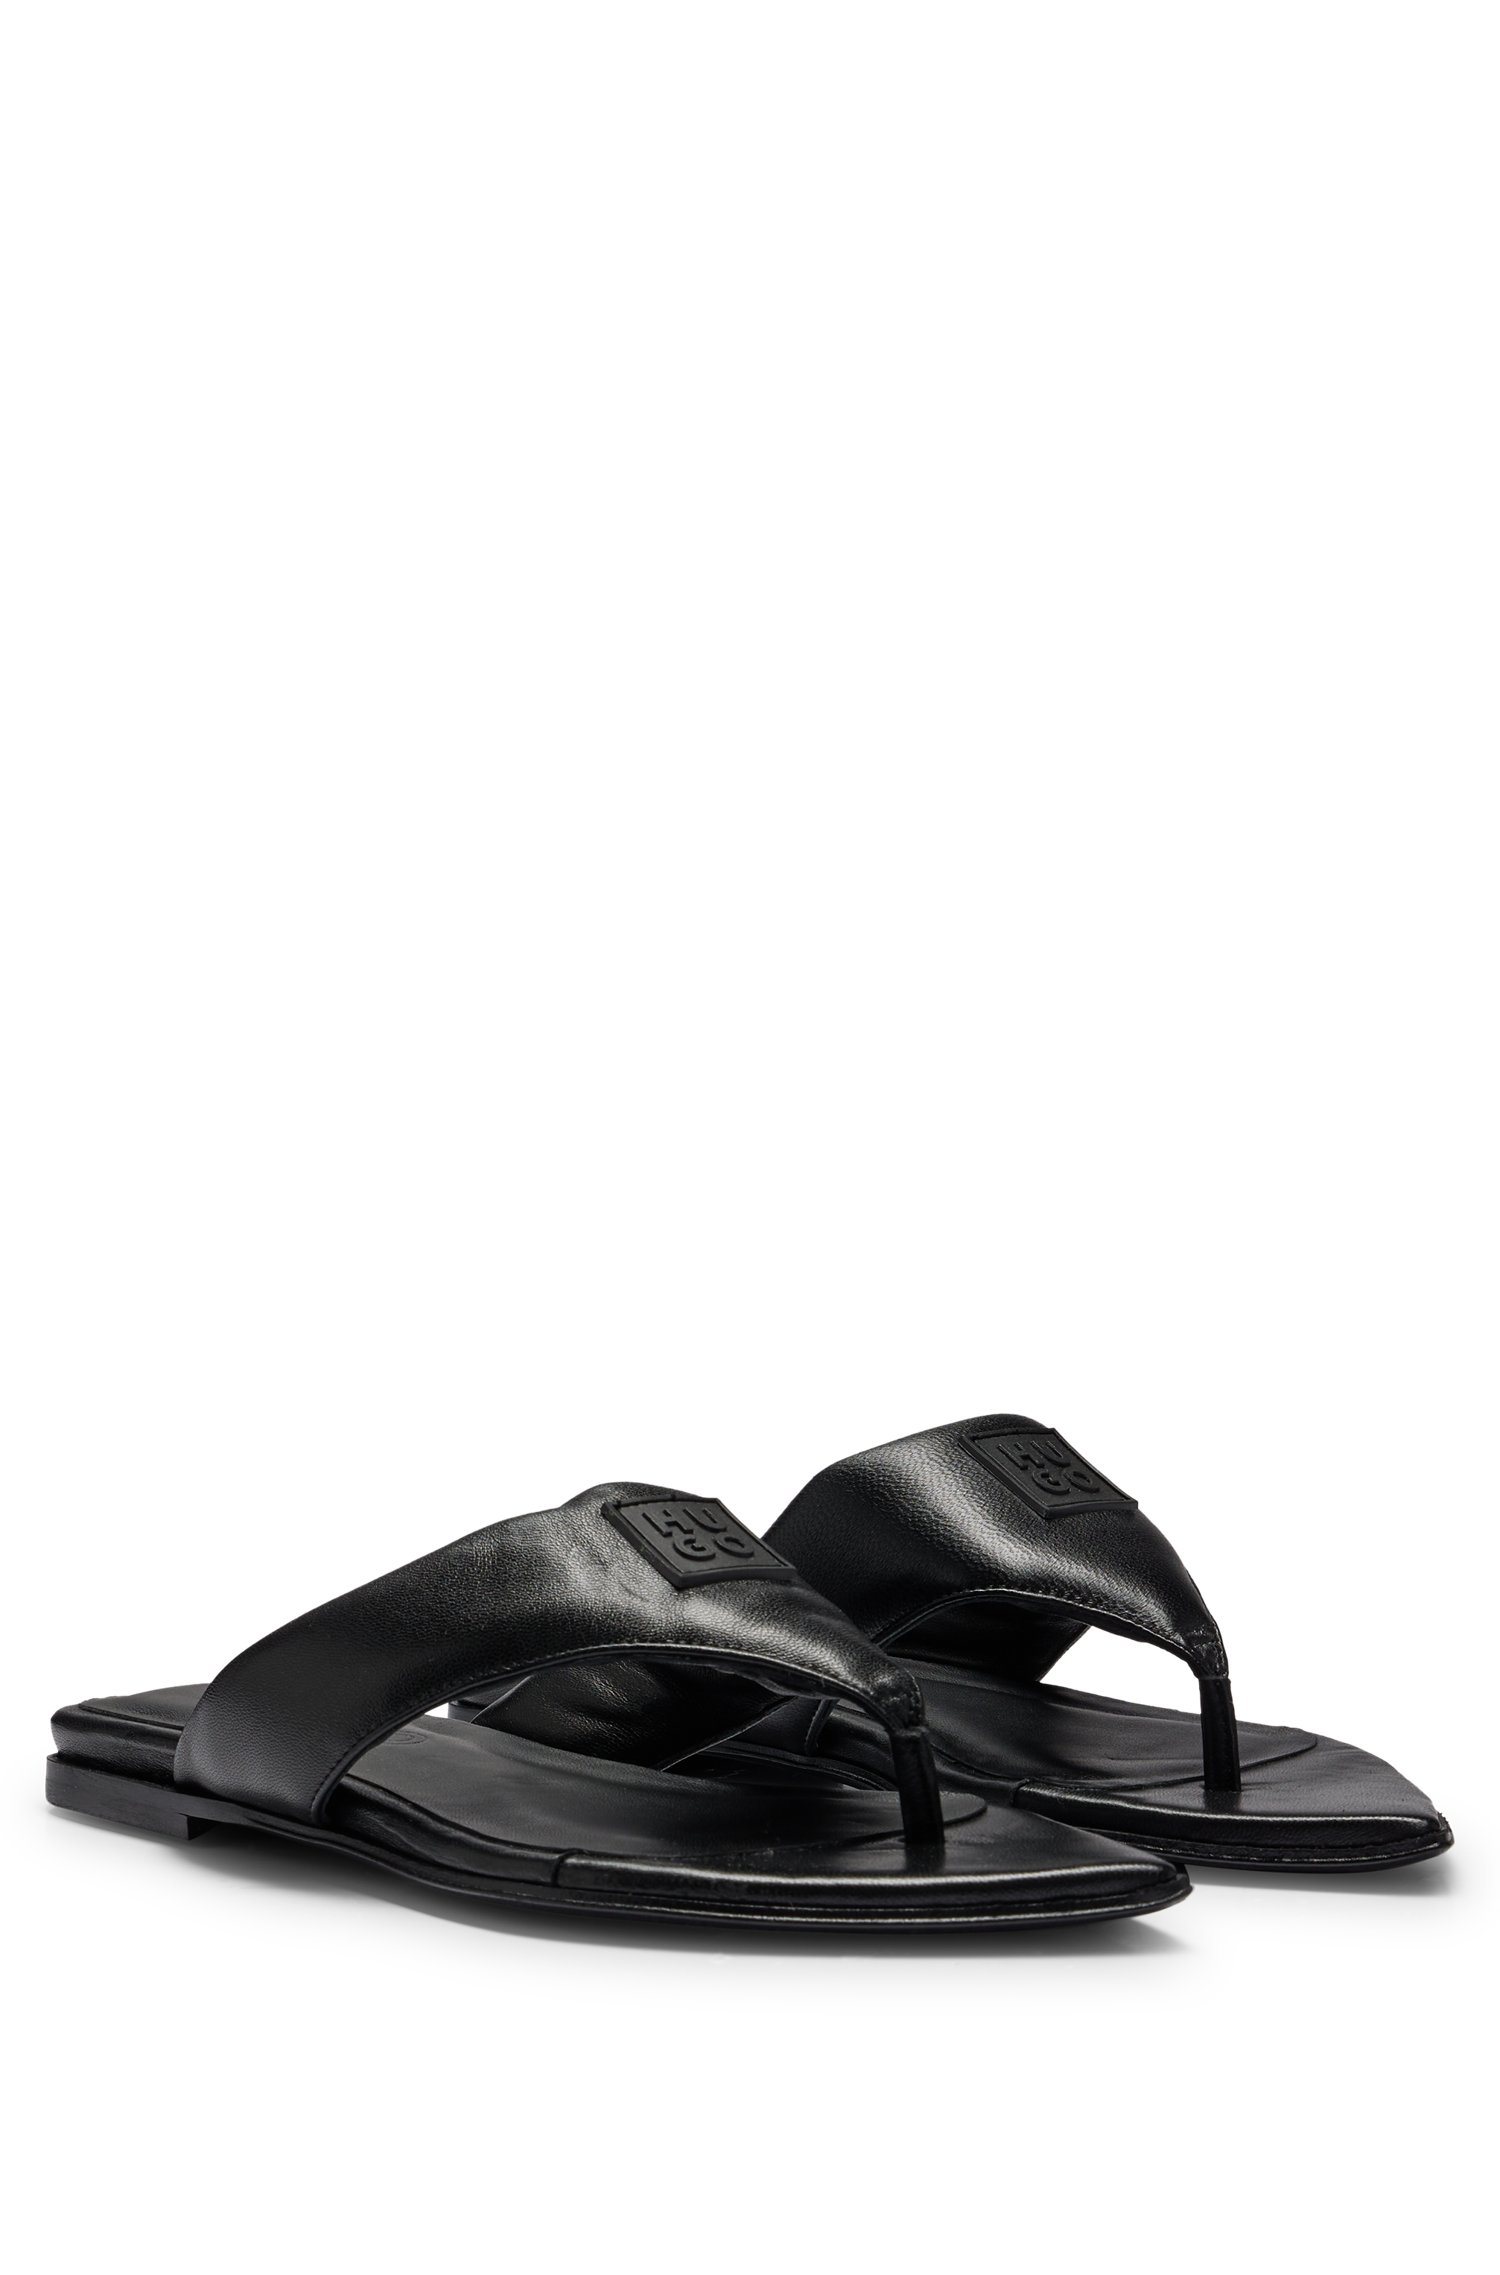 Leather thong sandals with stacked logo trim